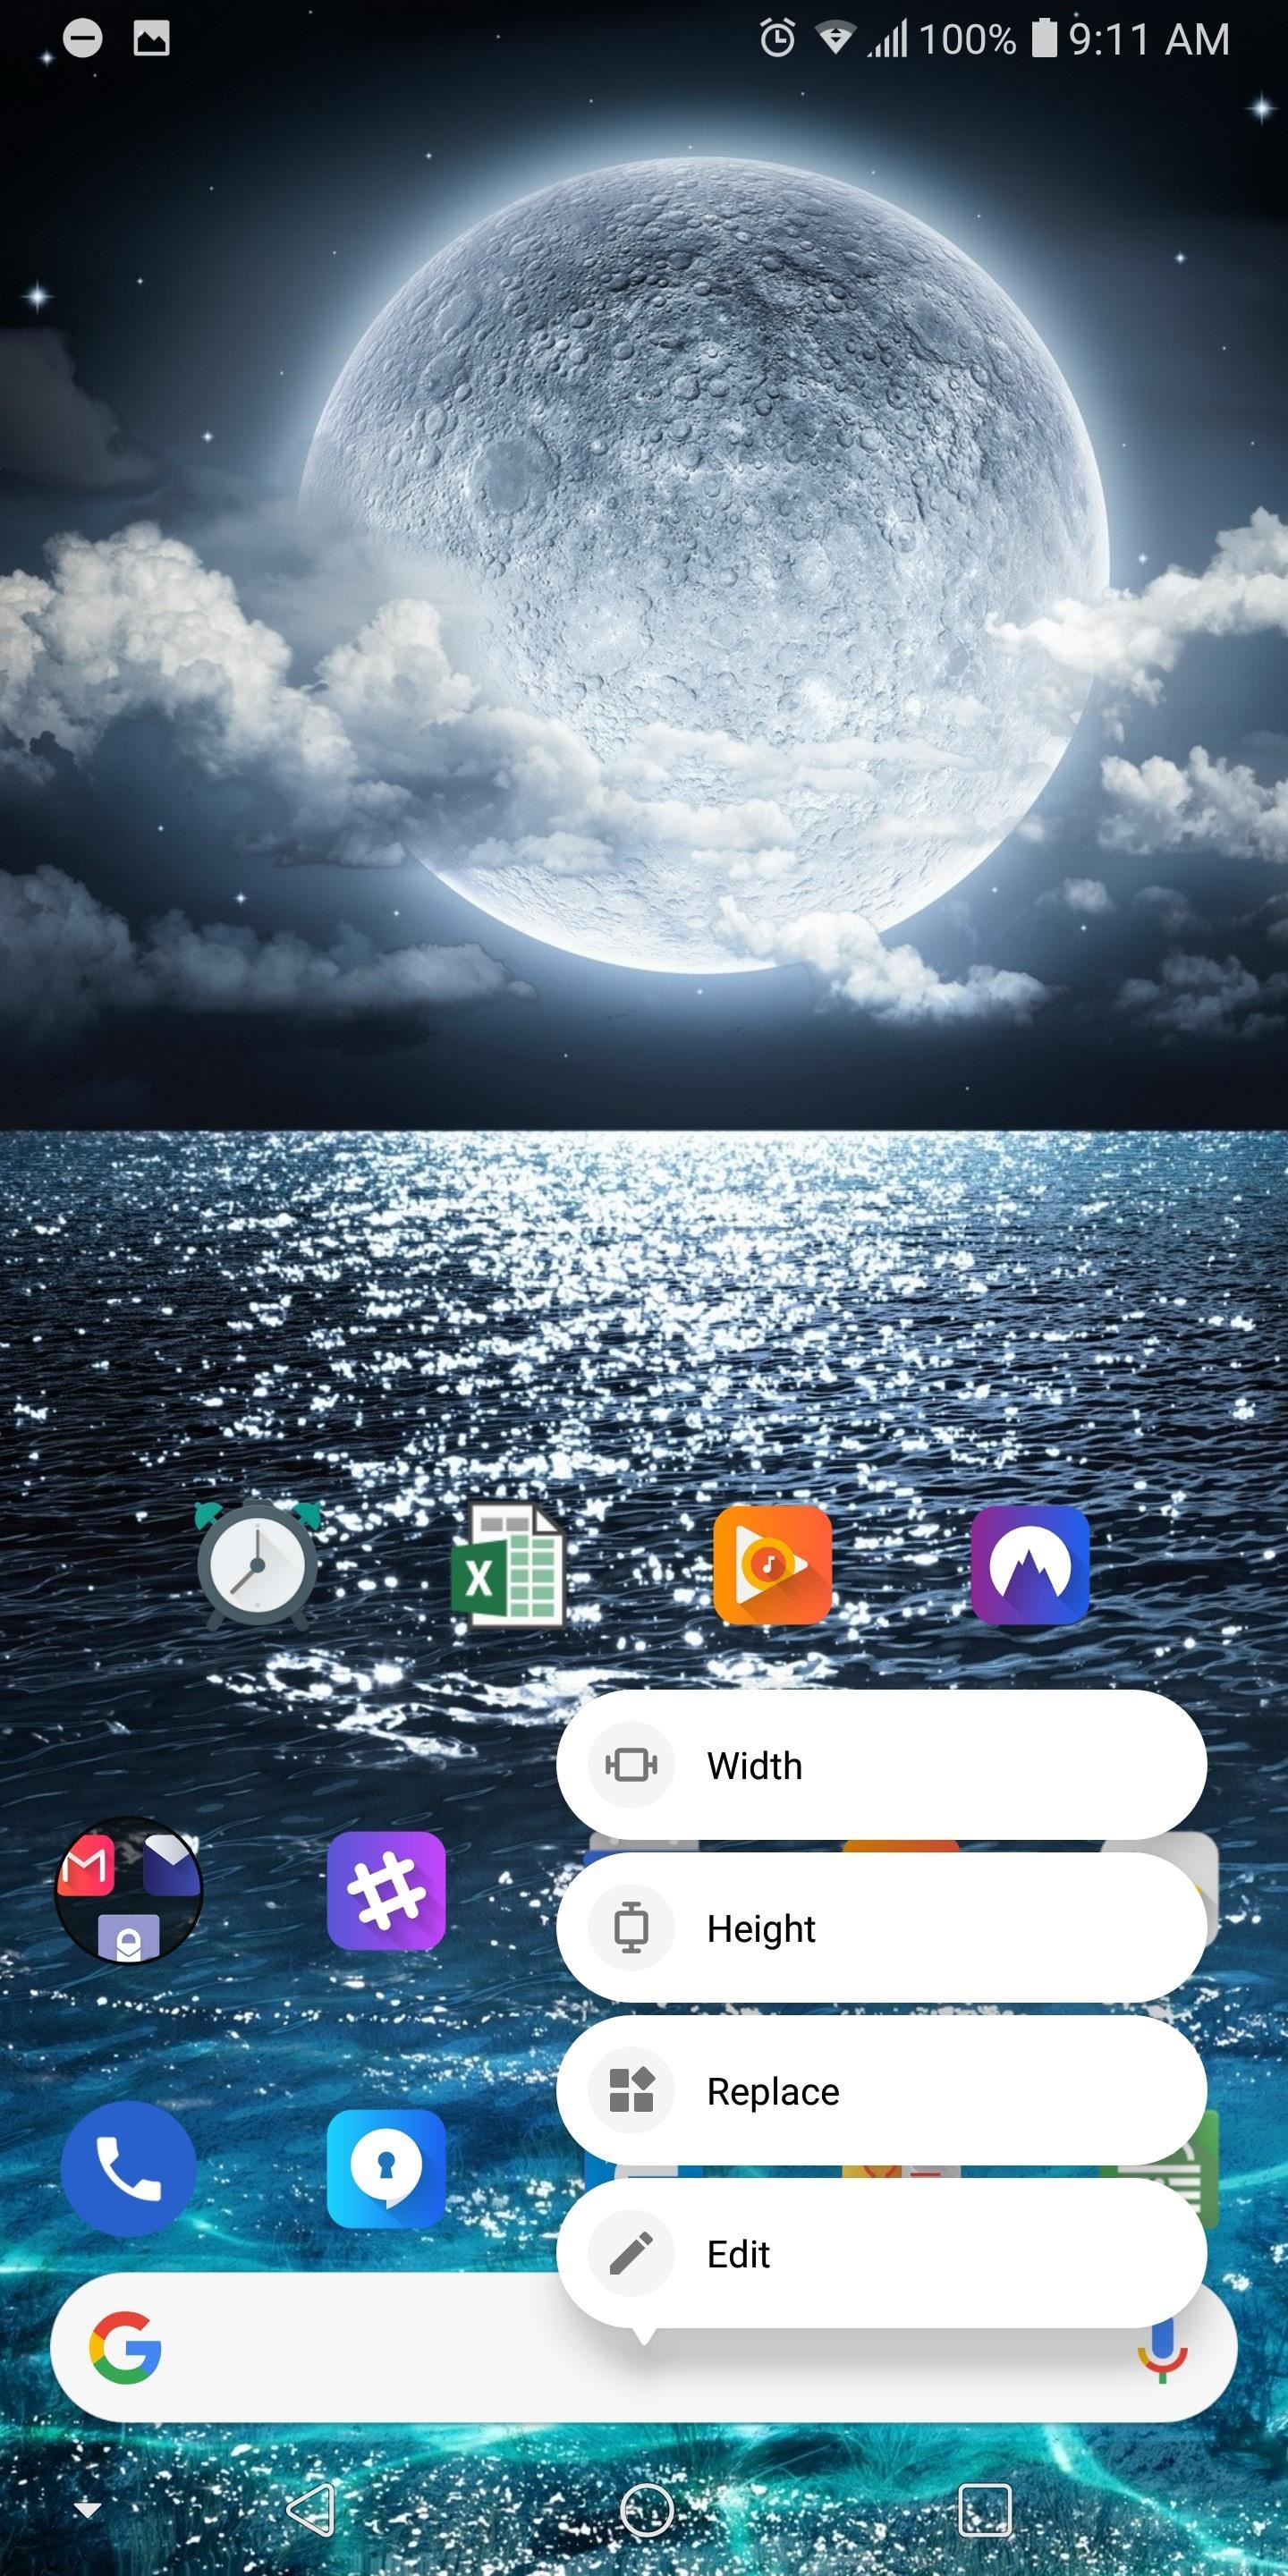 Nova Launcher 101: How to Add Any Widget to Android Oreo's Expanded Dock